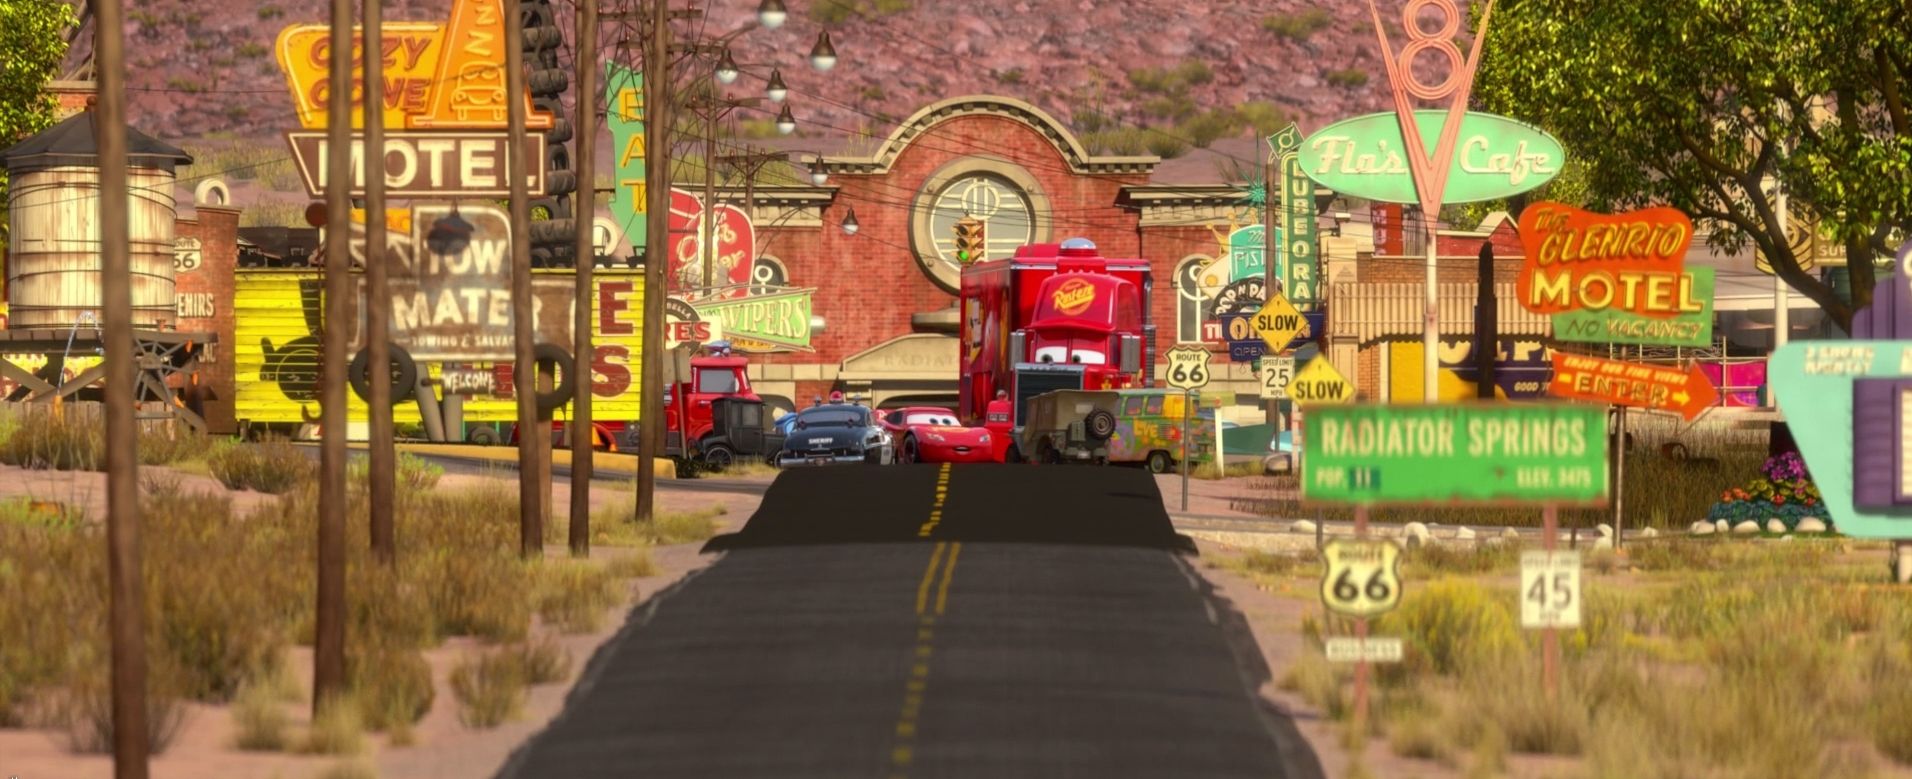 Radiator Springs by MagicalCrystal on DeviantArt